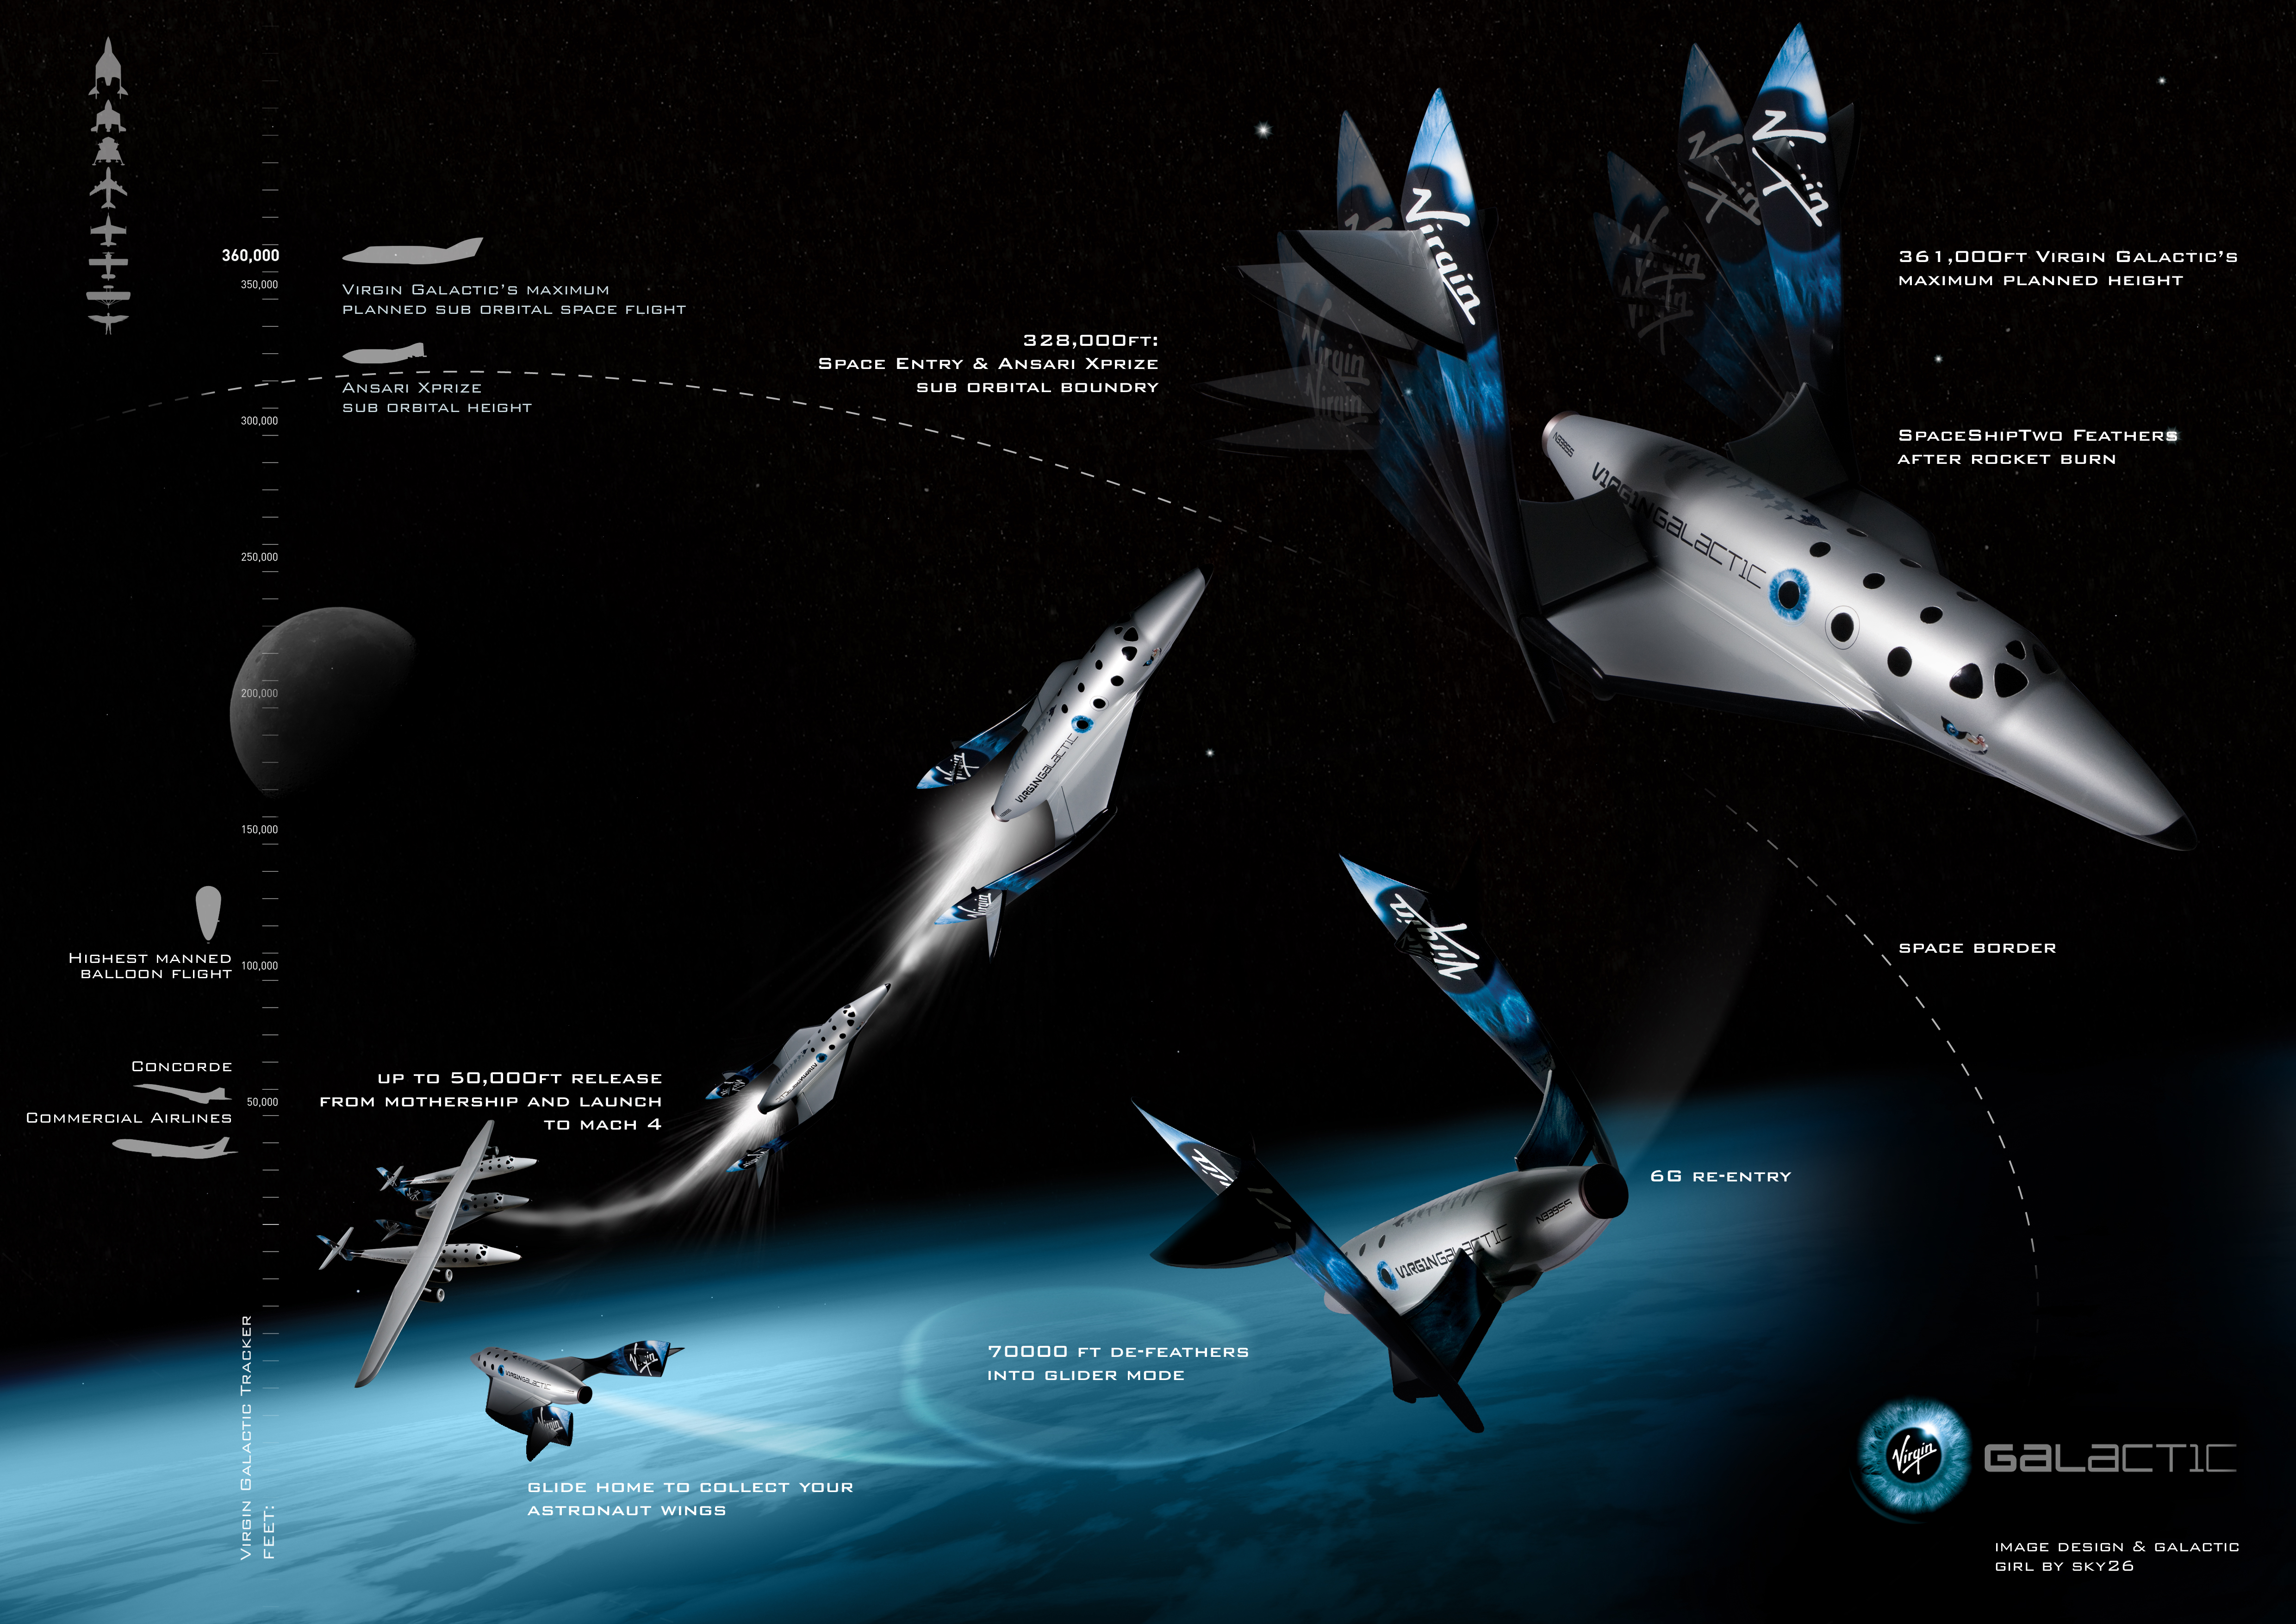 Amazing Virgin Galactic Pictures & Backgrounds